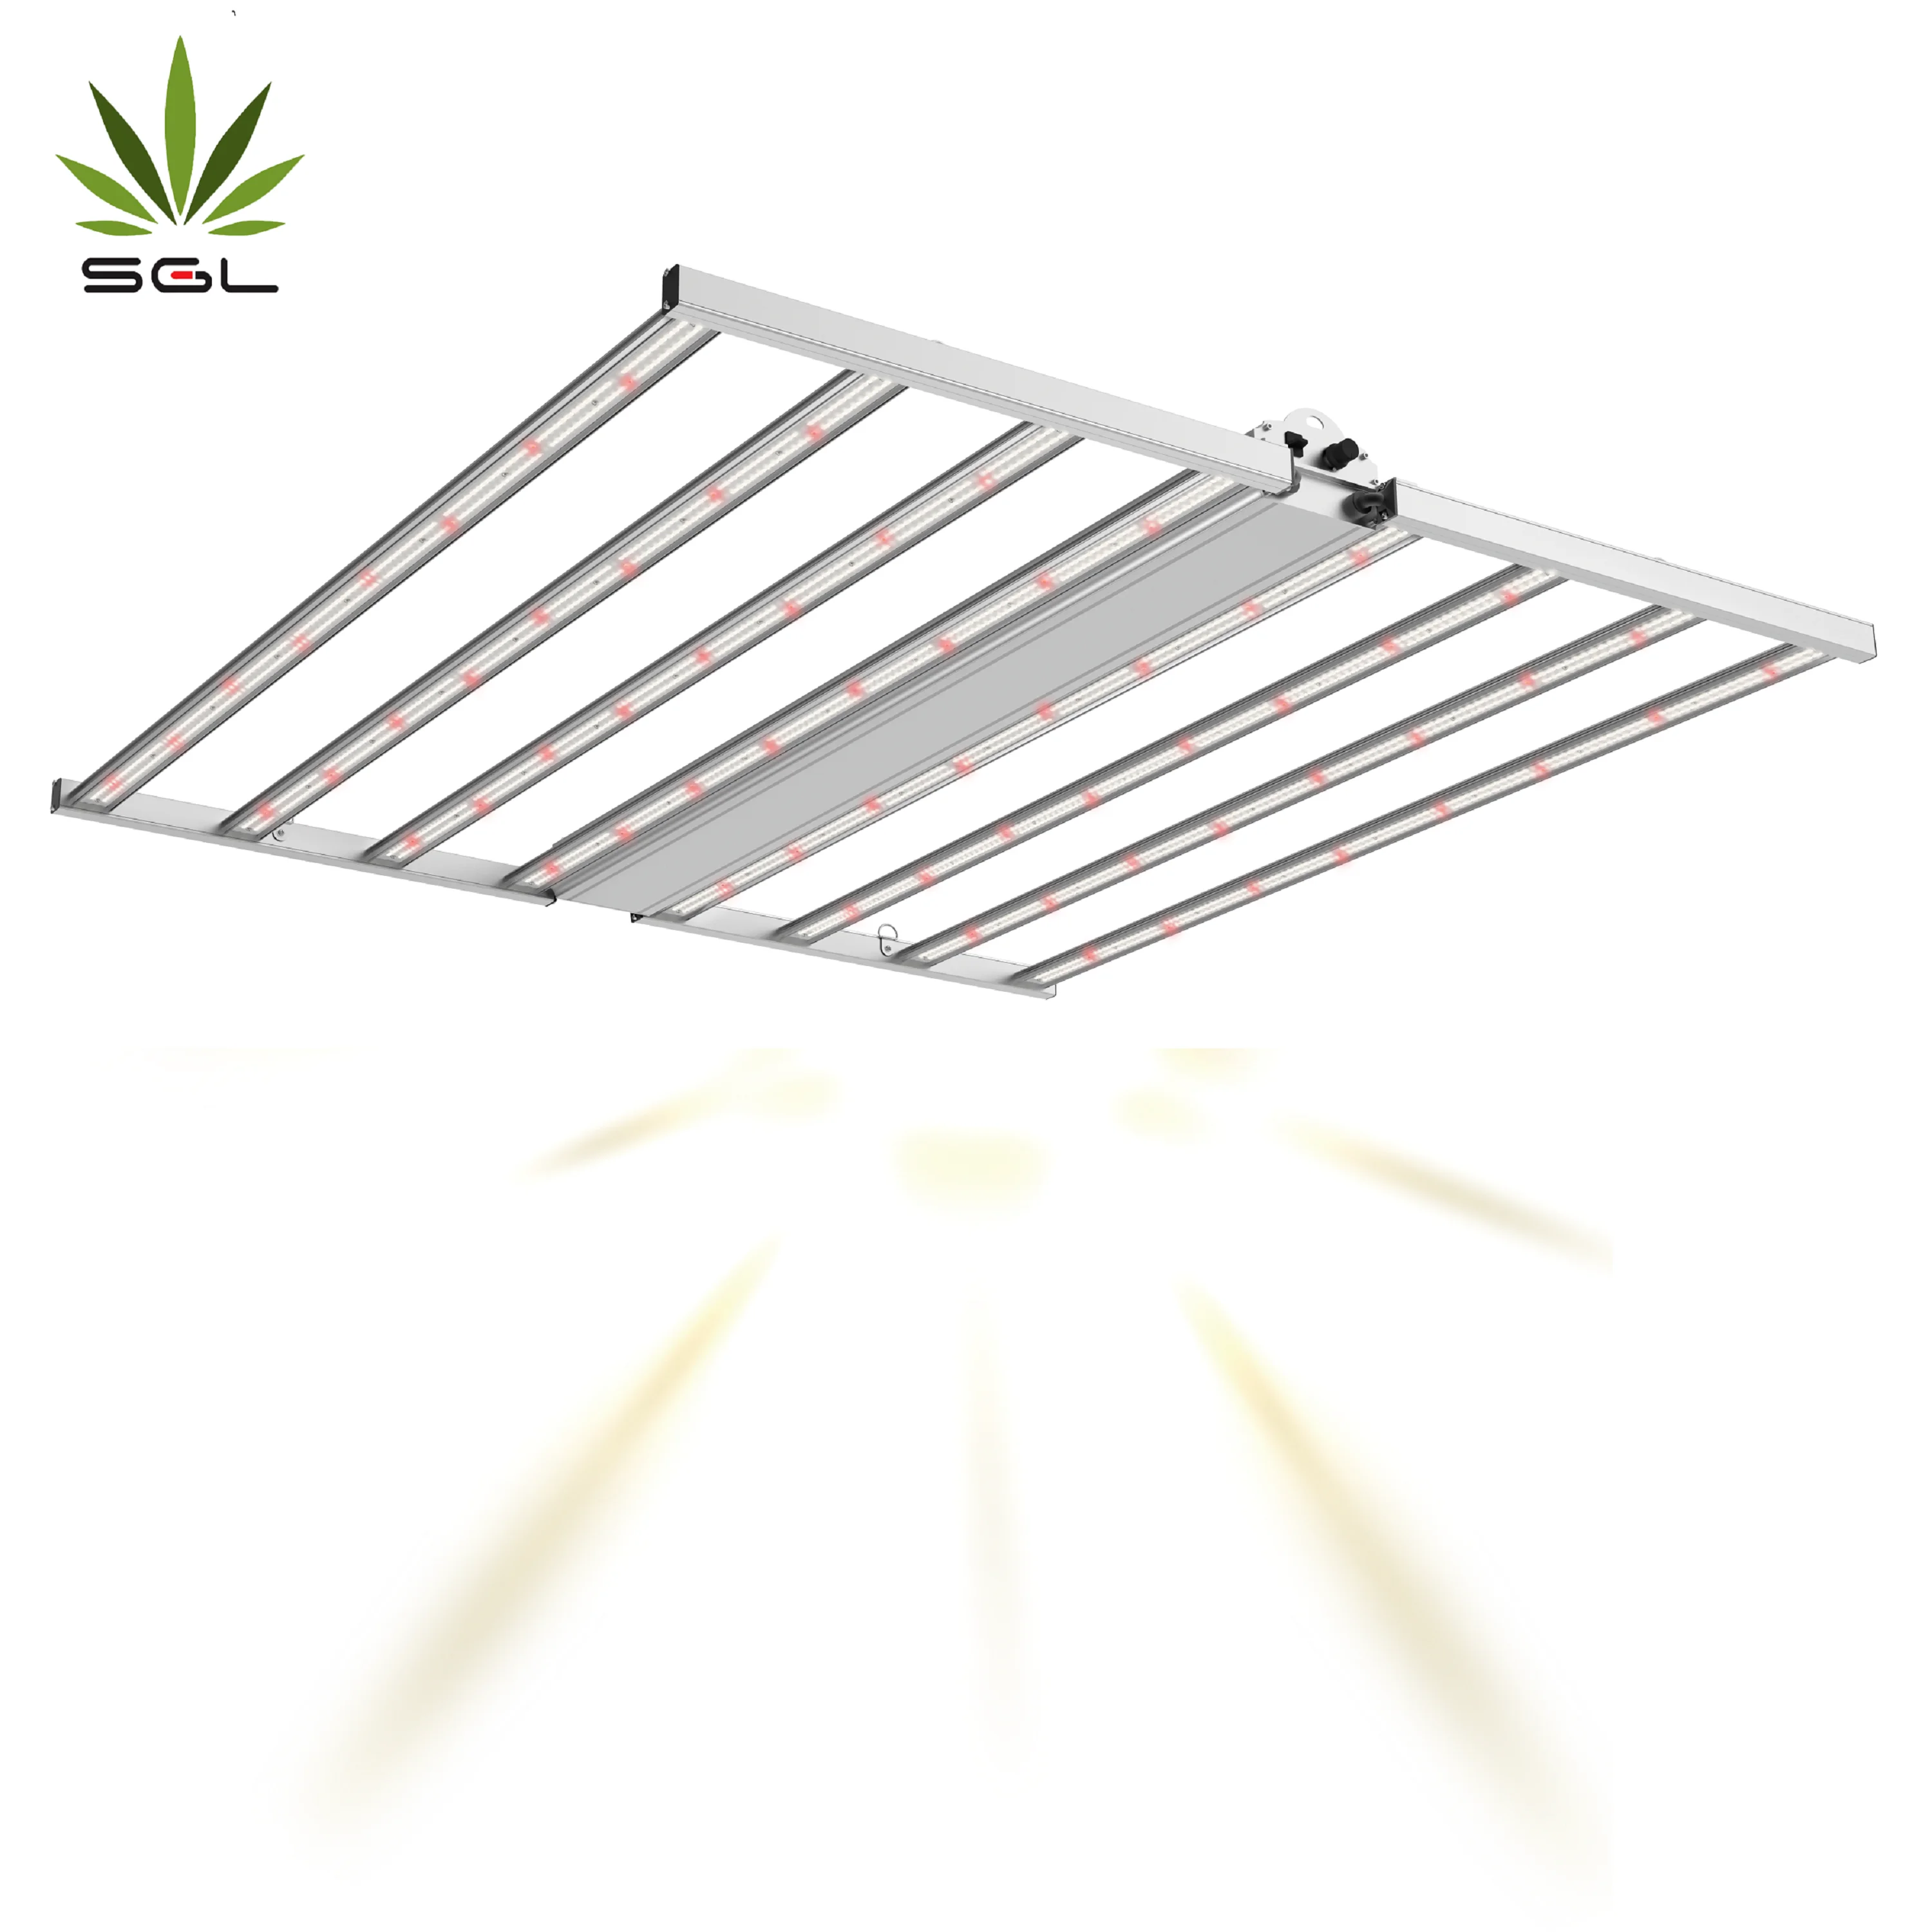 2020 Factory Wholesale LED GROW LIGHT 660W Fluence Spydr Gavita Replacing HPS Waterproof in greenhouse and indoor